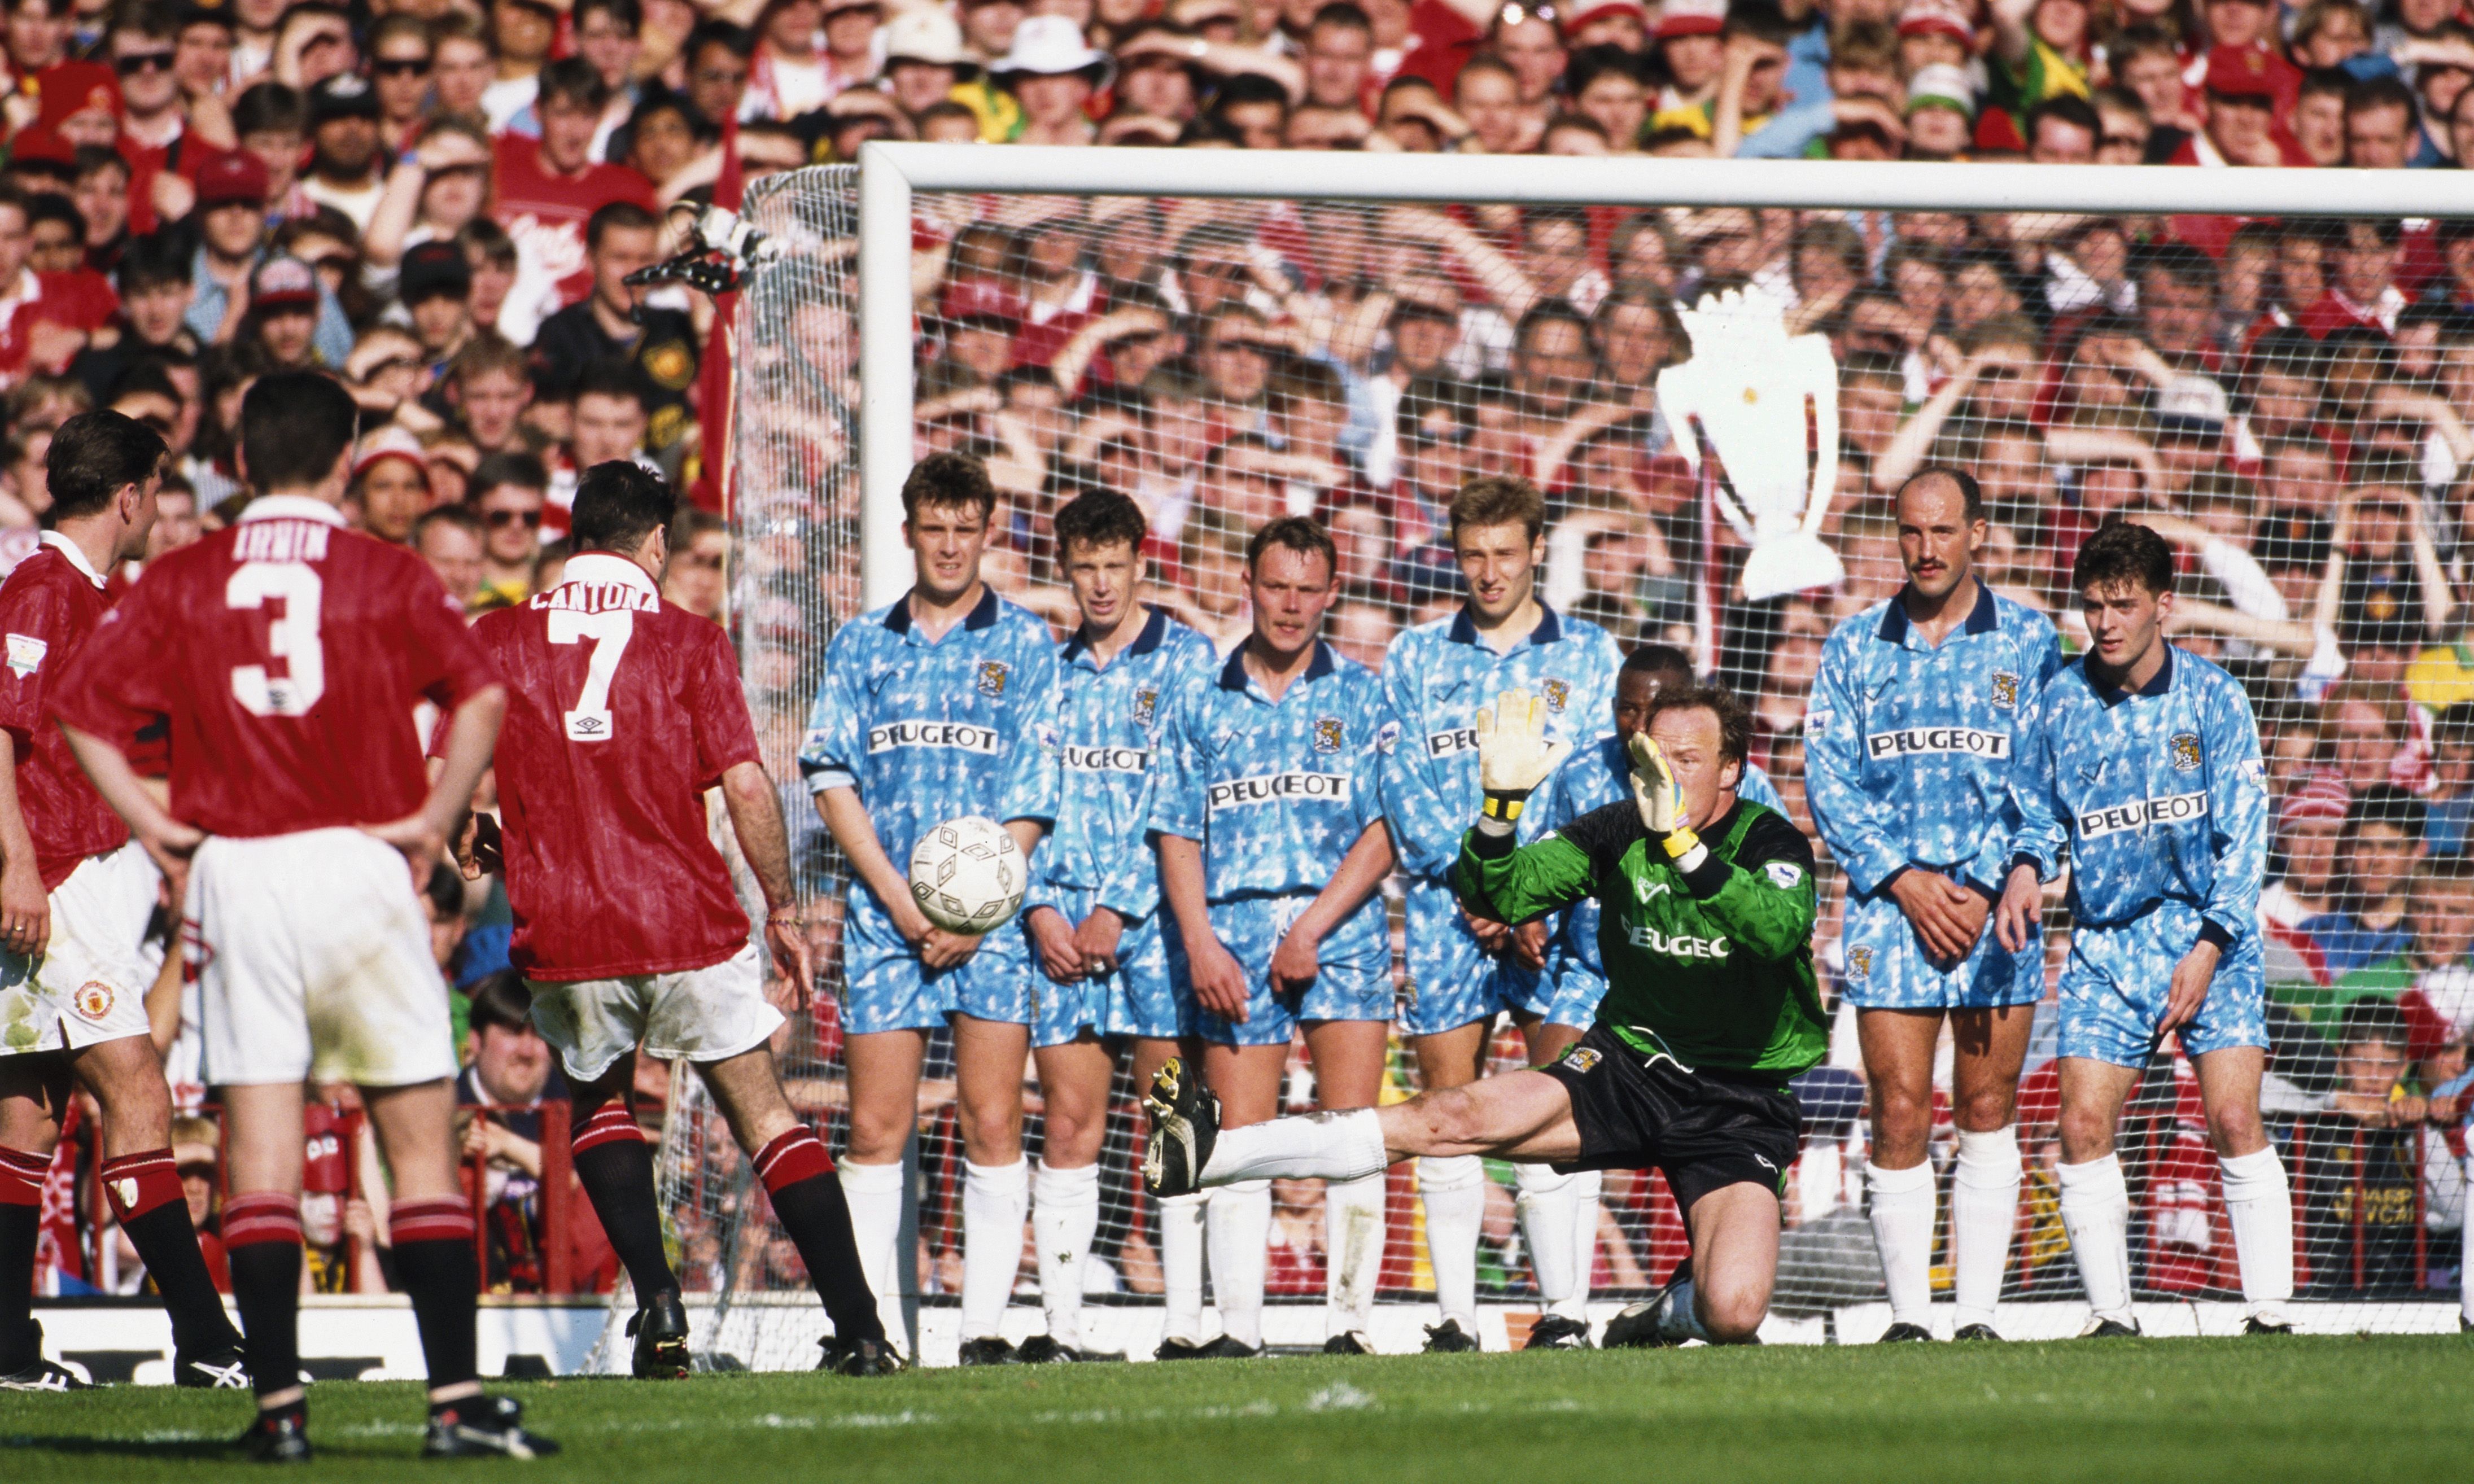 Coventry City goalkeeper Steve Ogrizovic and the City defensive wall